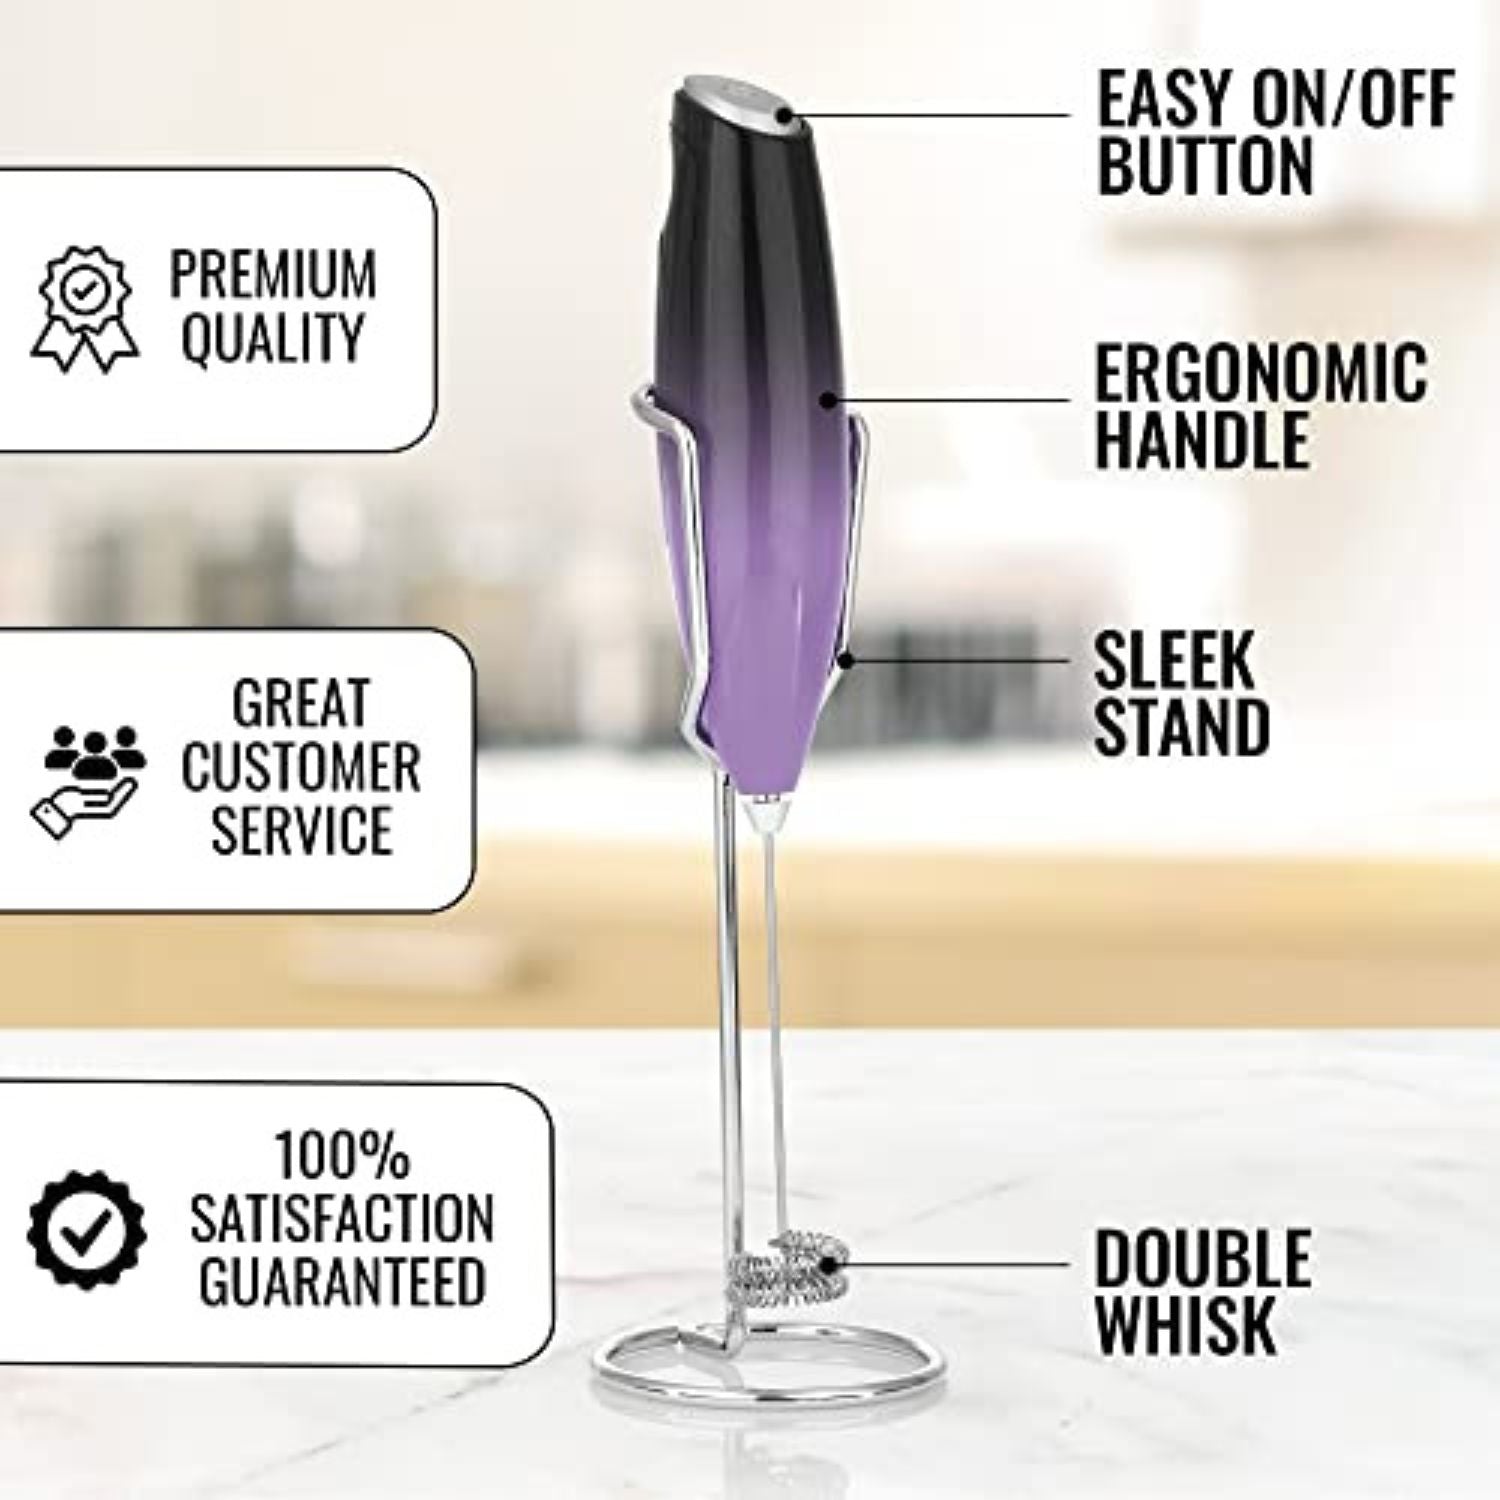 Premium Rechargeable Milk Frother - Double Whisks